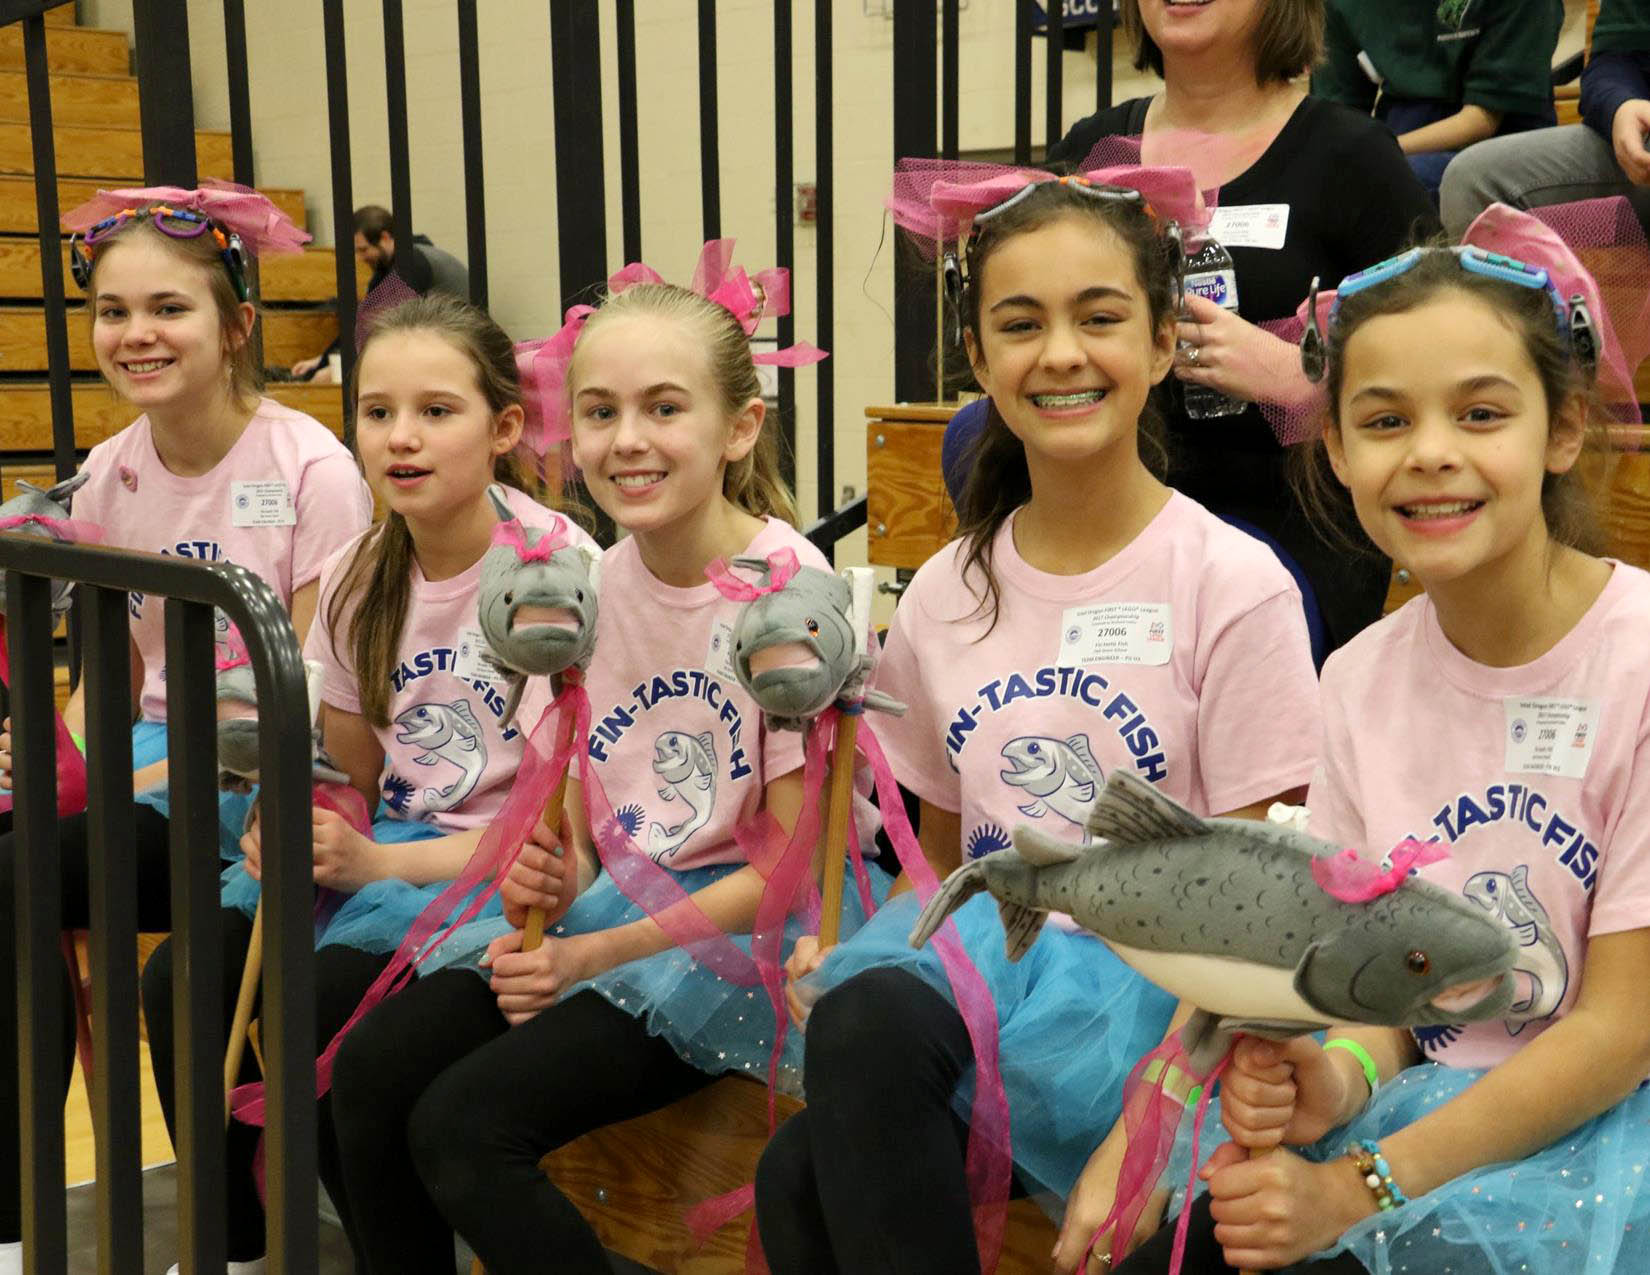 The Fin-tastic Fish team at the state championship competition.